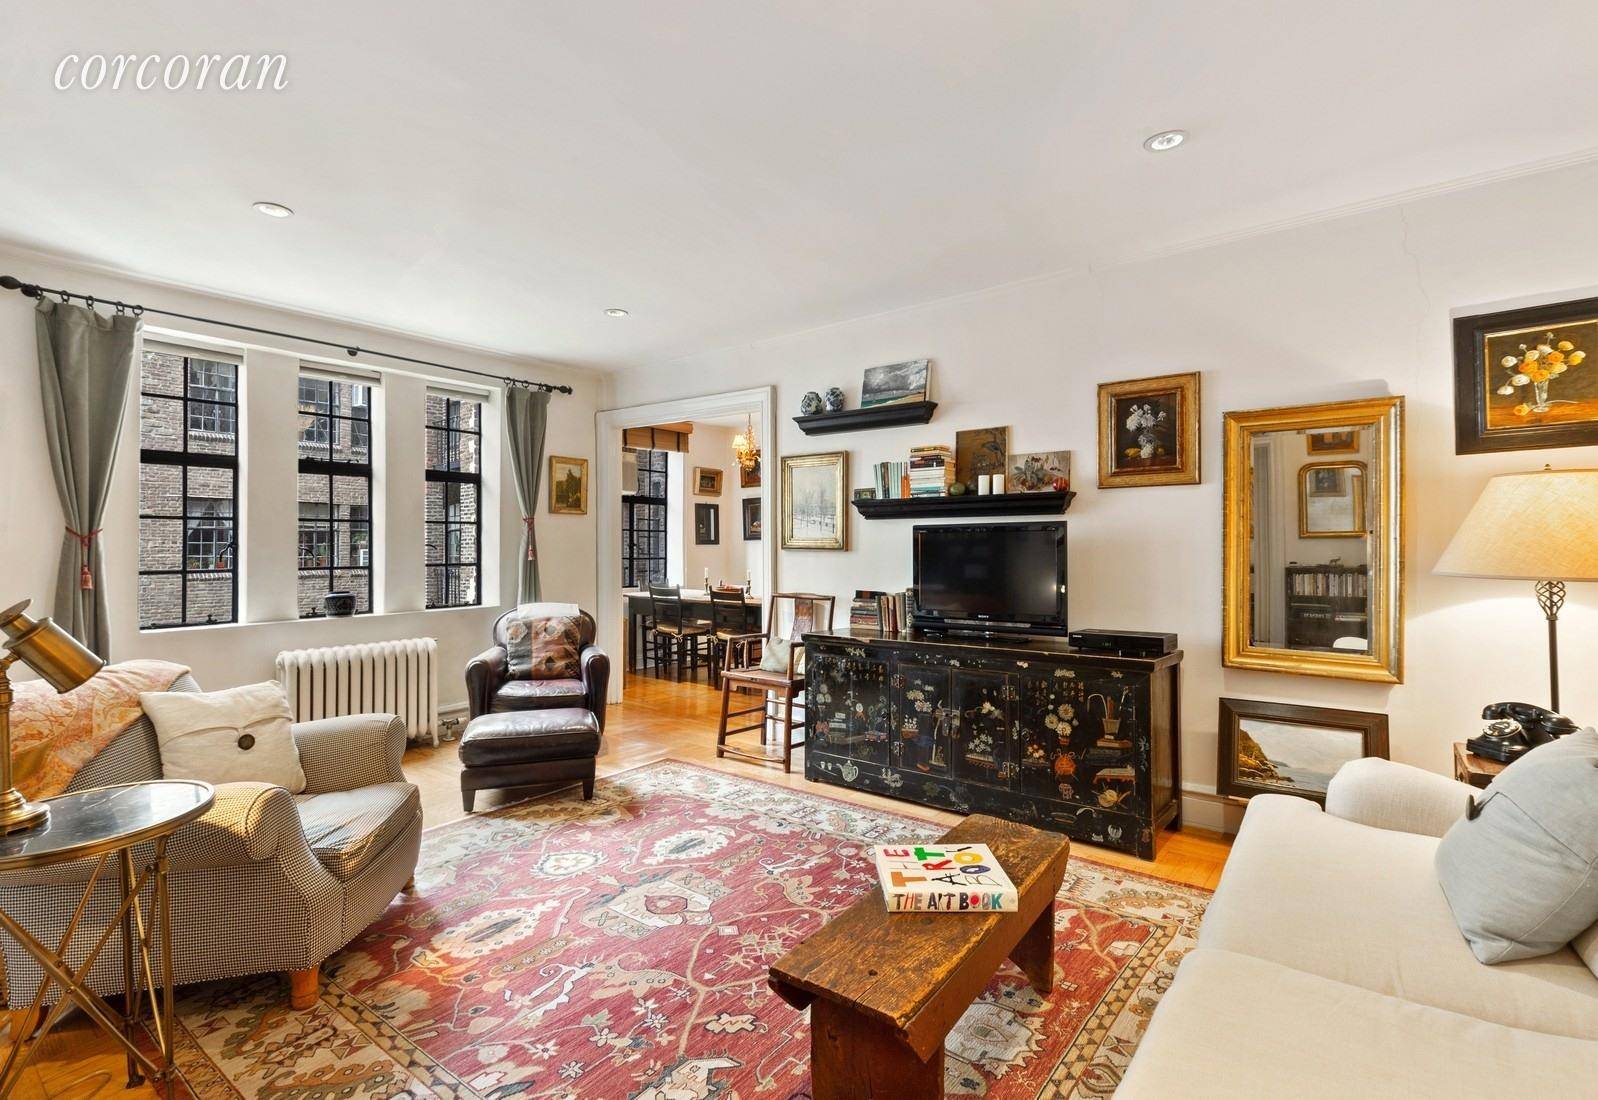 SOPHISTICATED ONE BEDROOM IN HUDSON VIEW GARDENS Sitting serenely above lush gardens and bathed in natural sunlight, this gracious home has an easy elegance and warmth that embraces you immediately ...